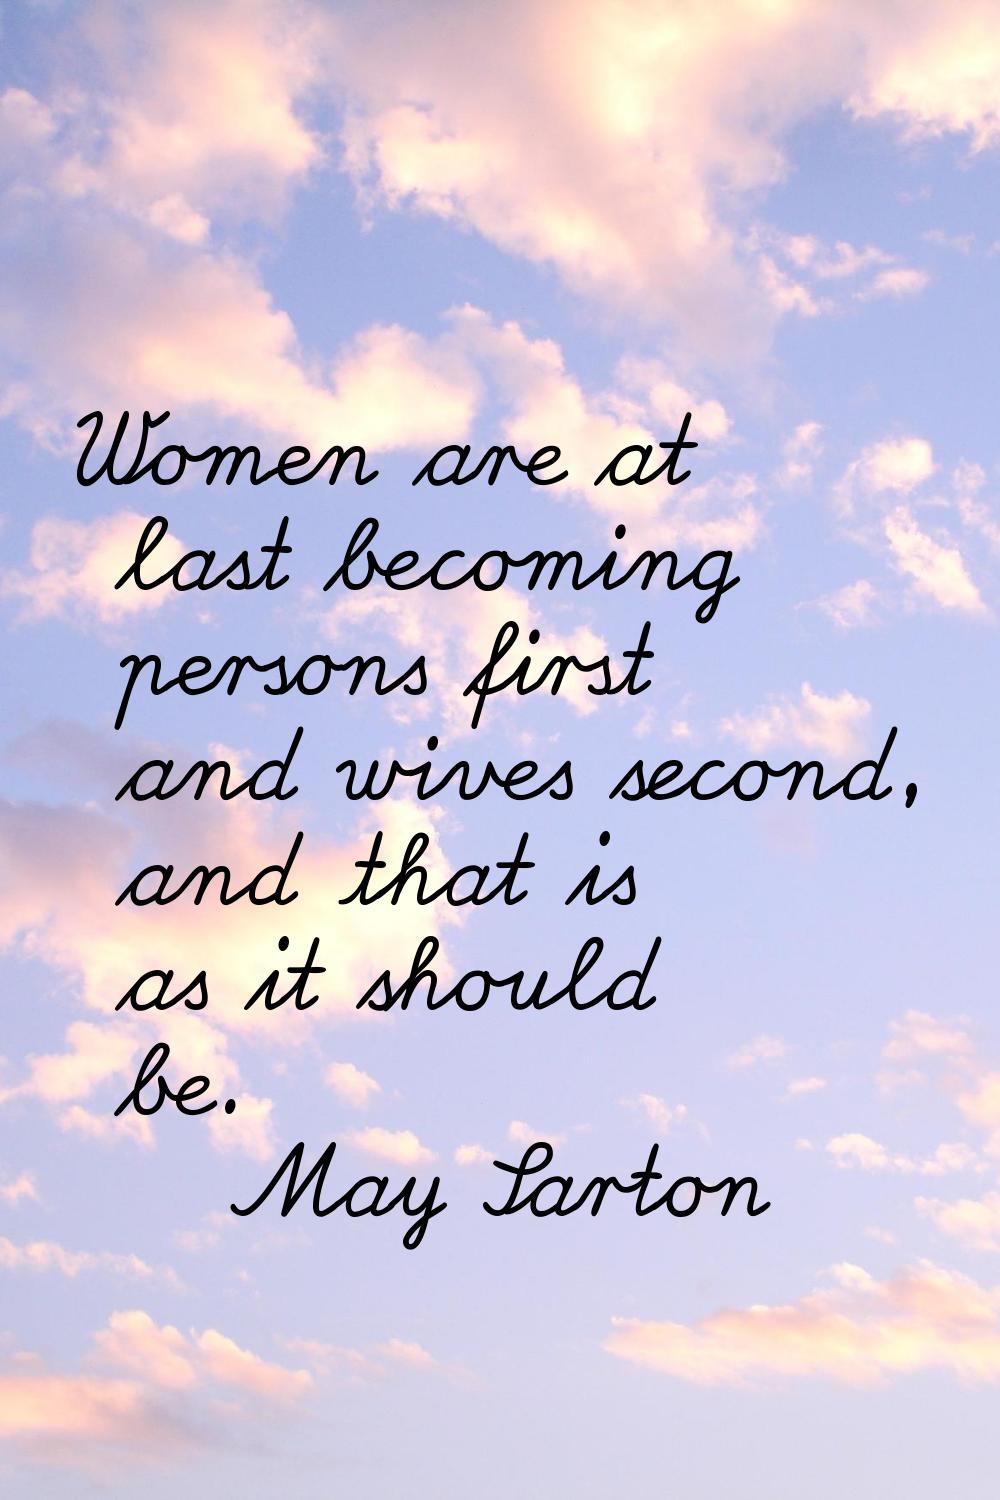 Women are at last becoming persons first and wives second, and that is as it should be.